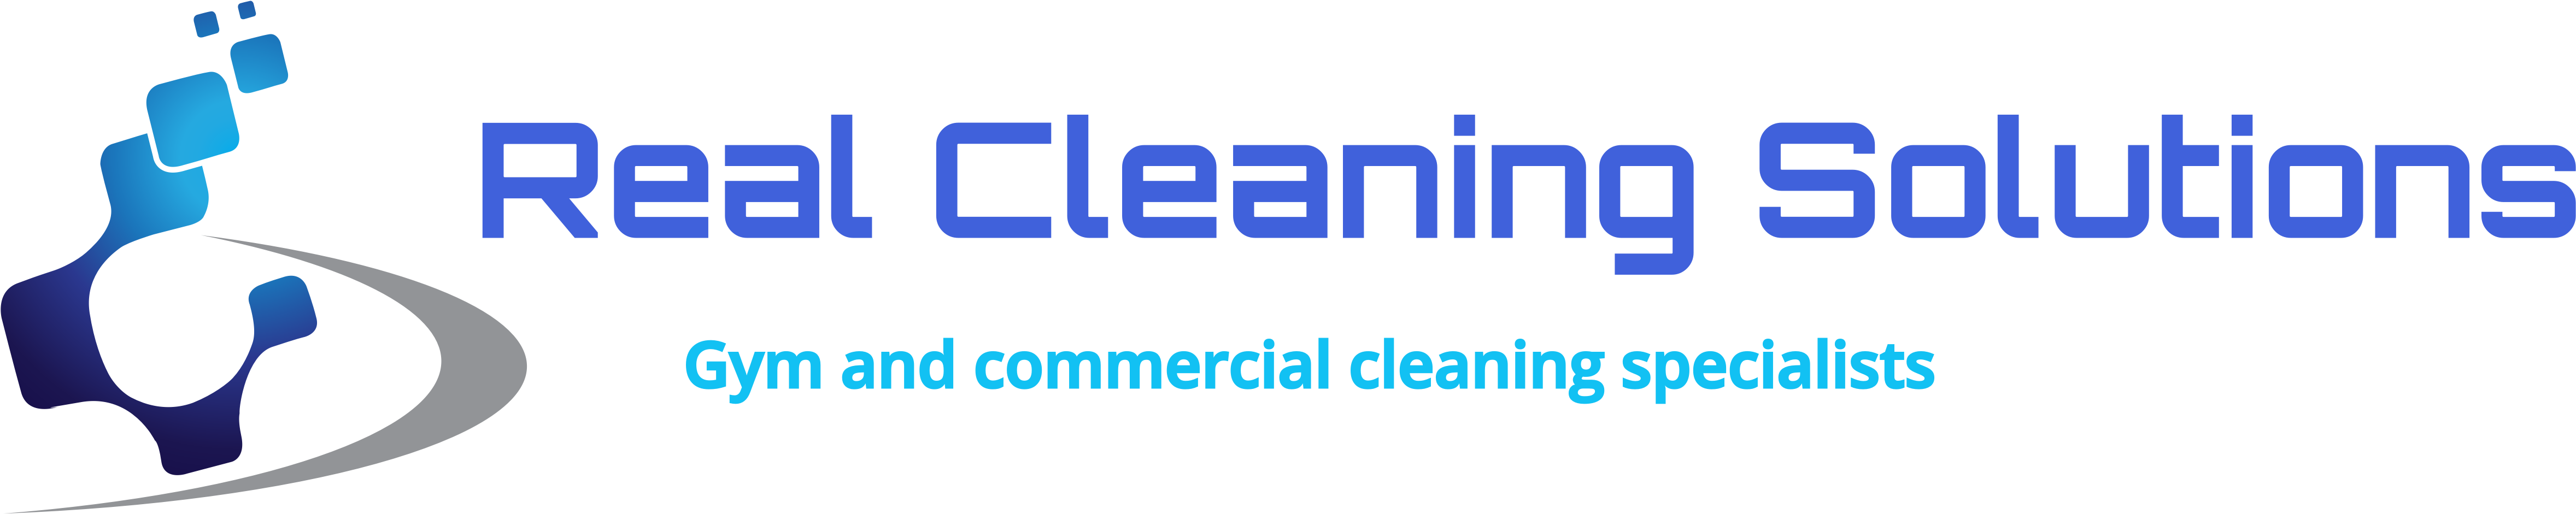 Commercial, Office & Gym Cleaners Melbourne - Electric Blue (5000x1234)